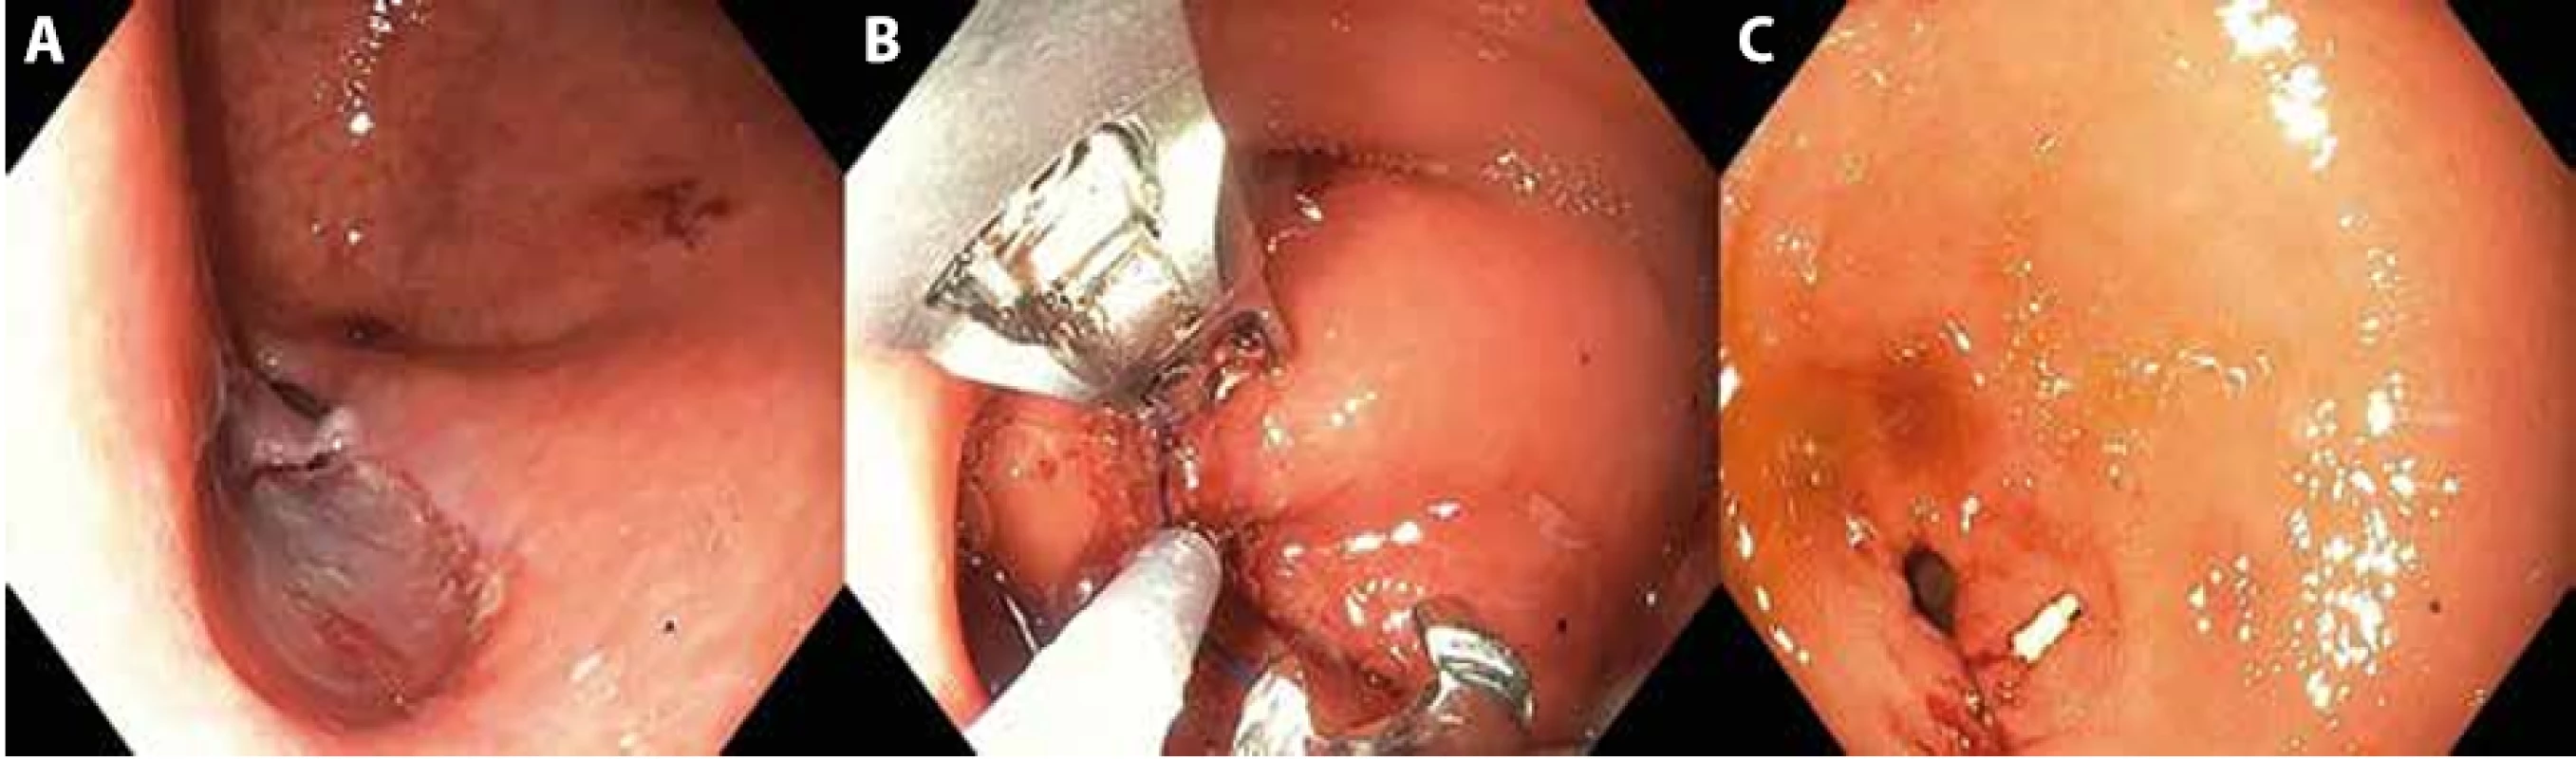 A) Endoscopic view of the longitudinal mucosal incision; B) Endoscopic suturing system used for mucosotomy closure; C) Successful closure.